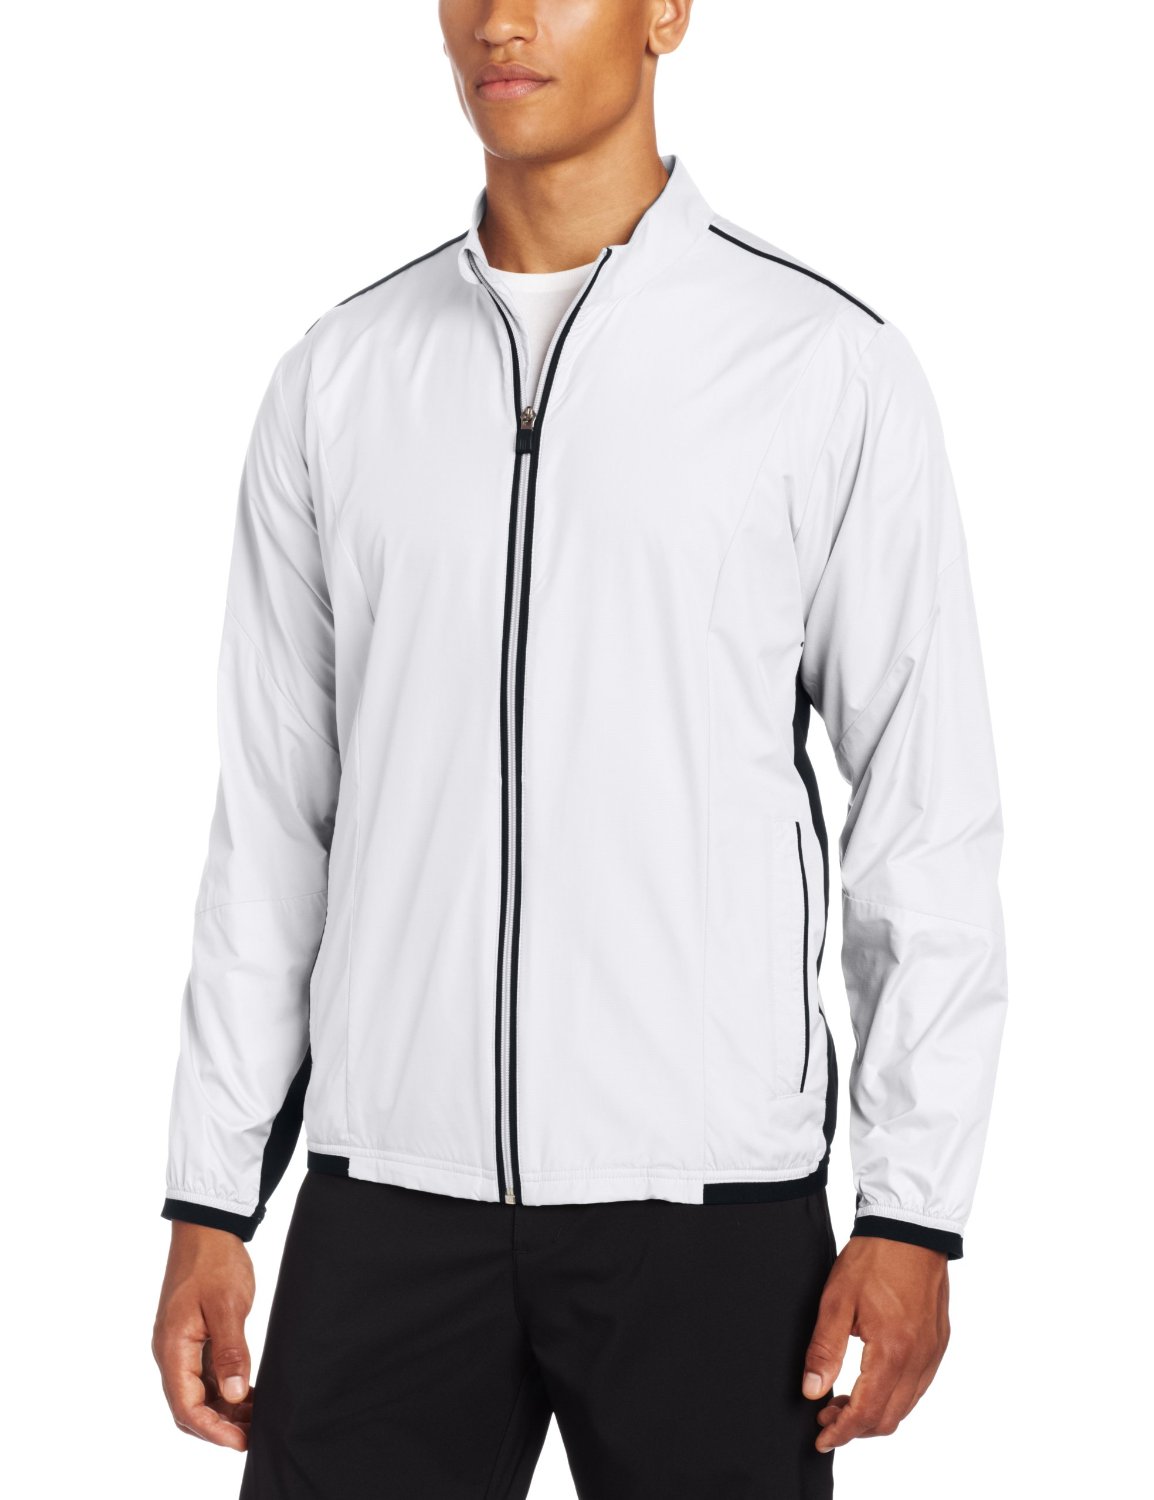 Mens ClimaProof Stretch Wind Jackets